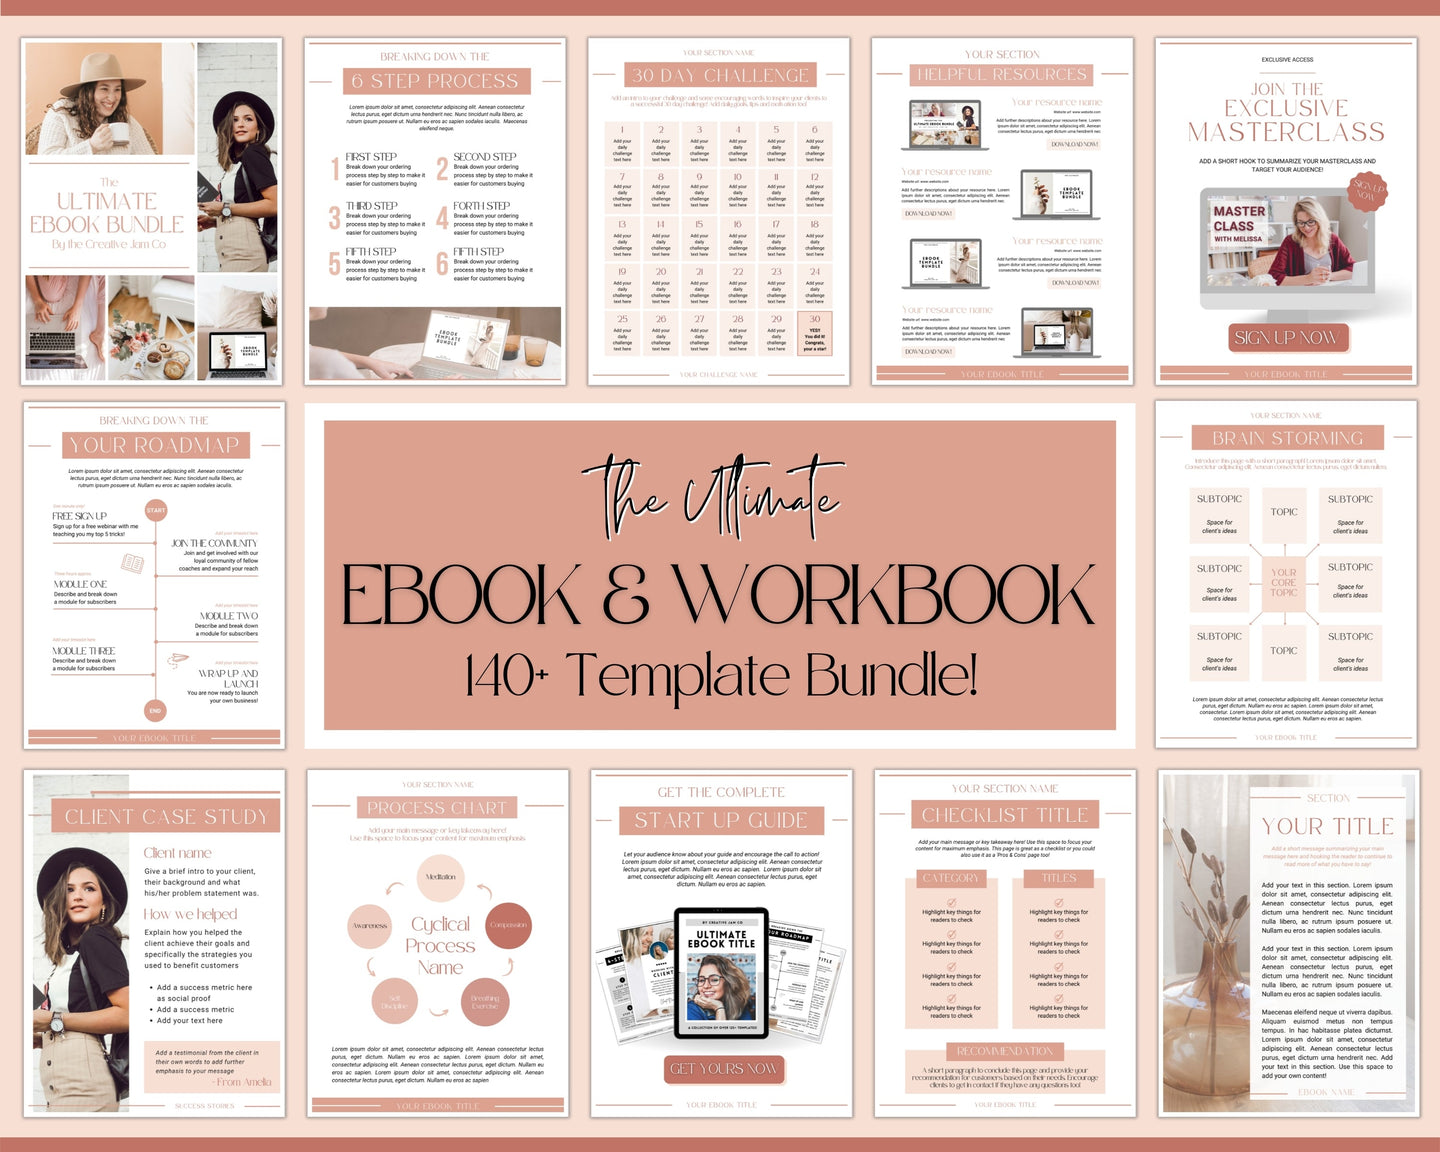 140+ eBook Template Canva, Workbook, Worksheets & Lead Magnet for Coaches, Bloggers. Opt In, Charts, Checklists, Planners, Webinar, Challenges | Natural Brown